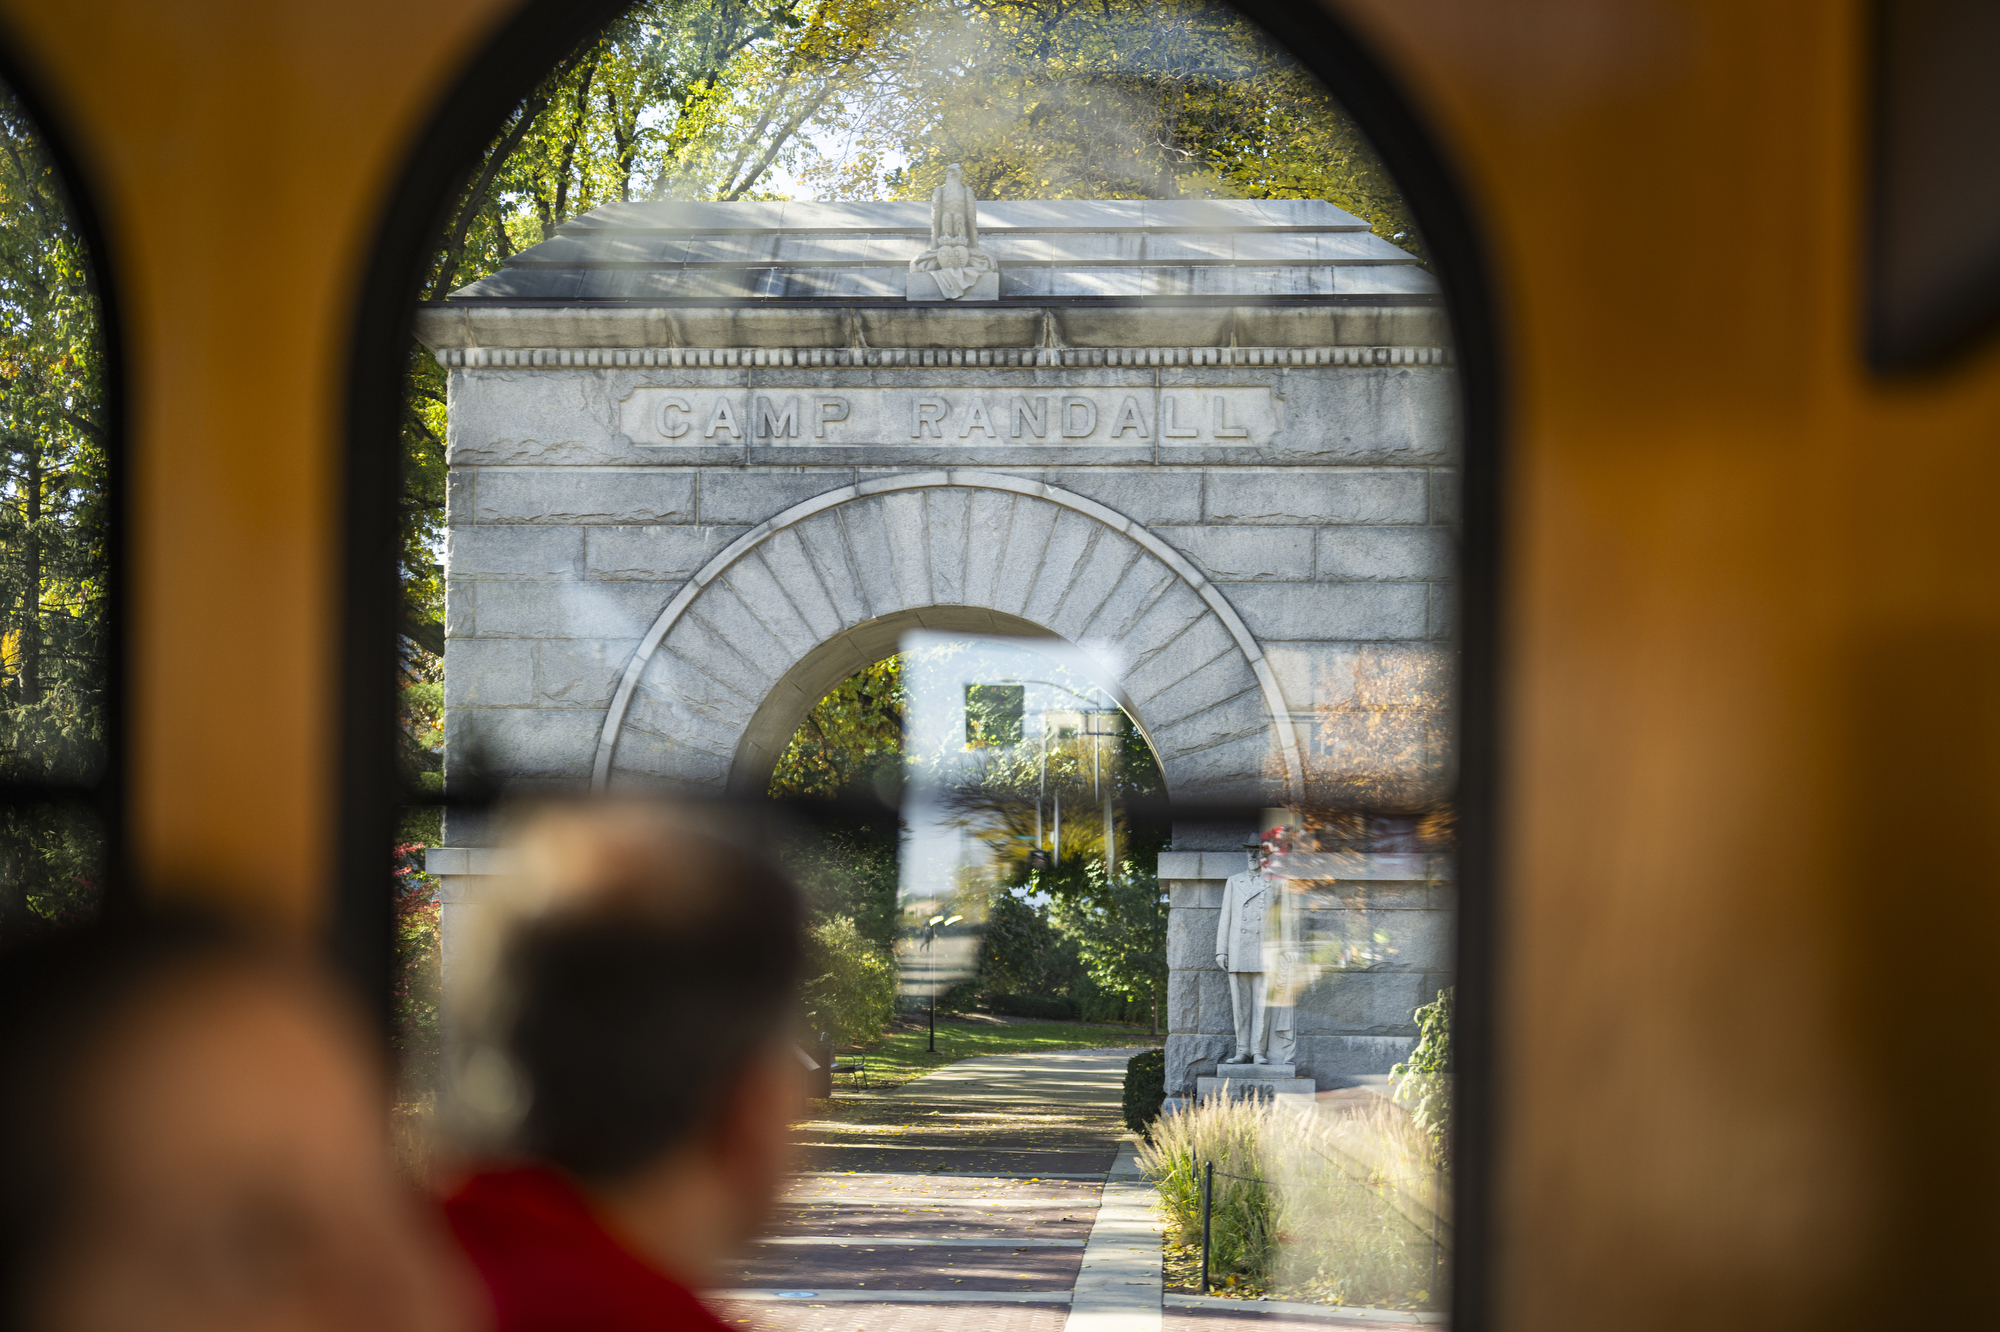 Through the window of a trolly-style bus, a passenger looks out at a stone archway with the words Camp Randall inscribed across the top.